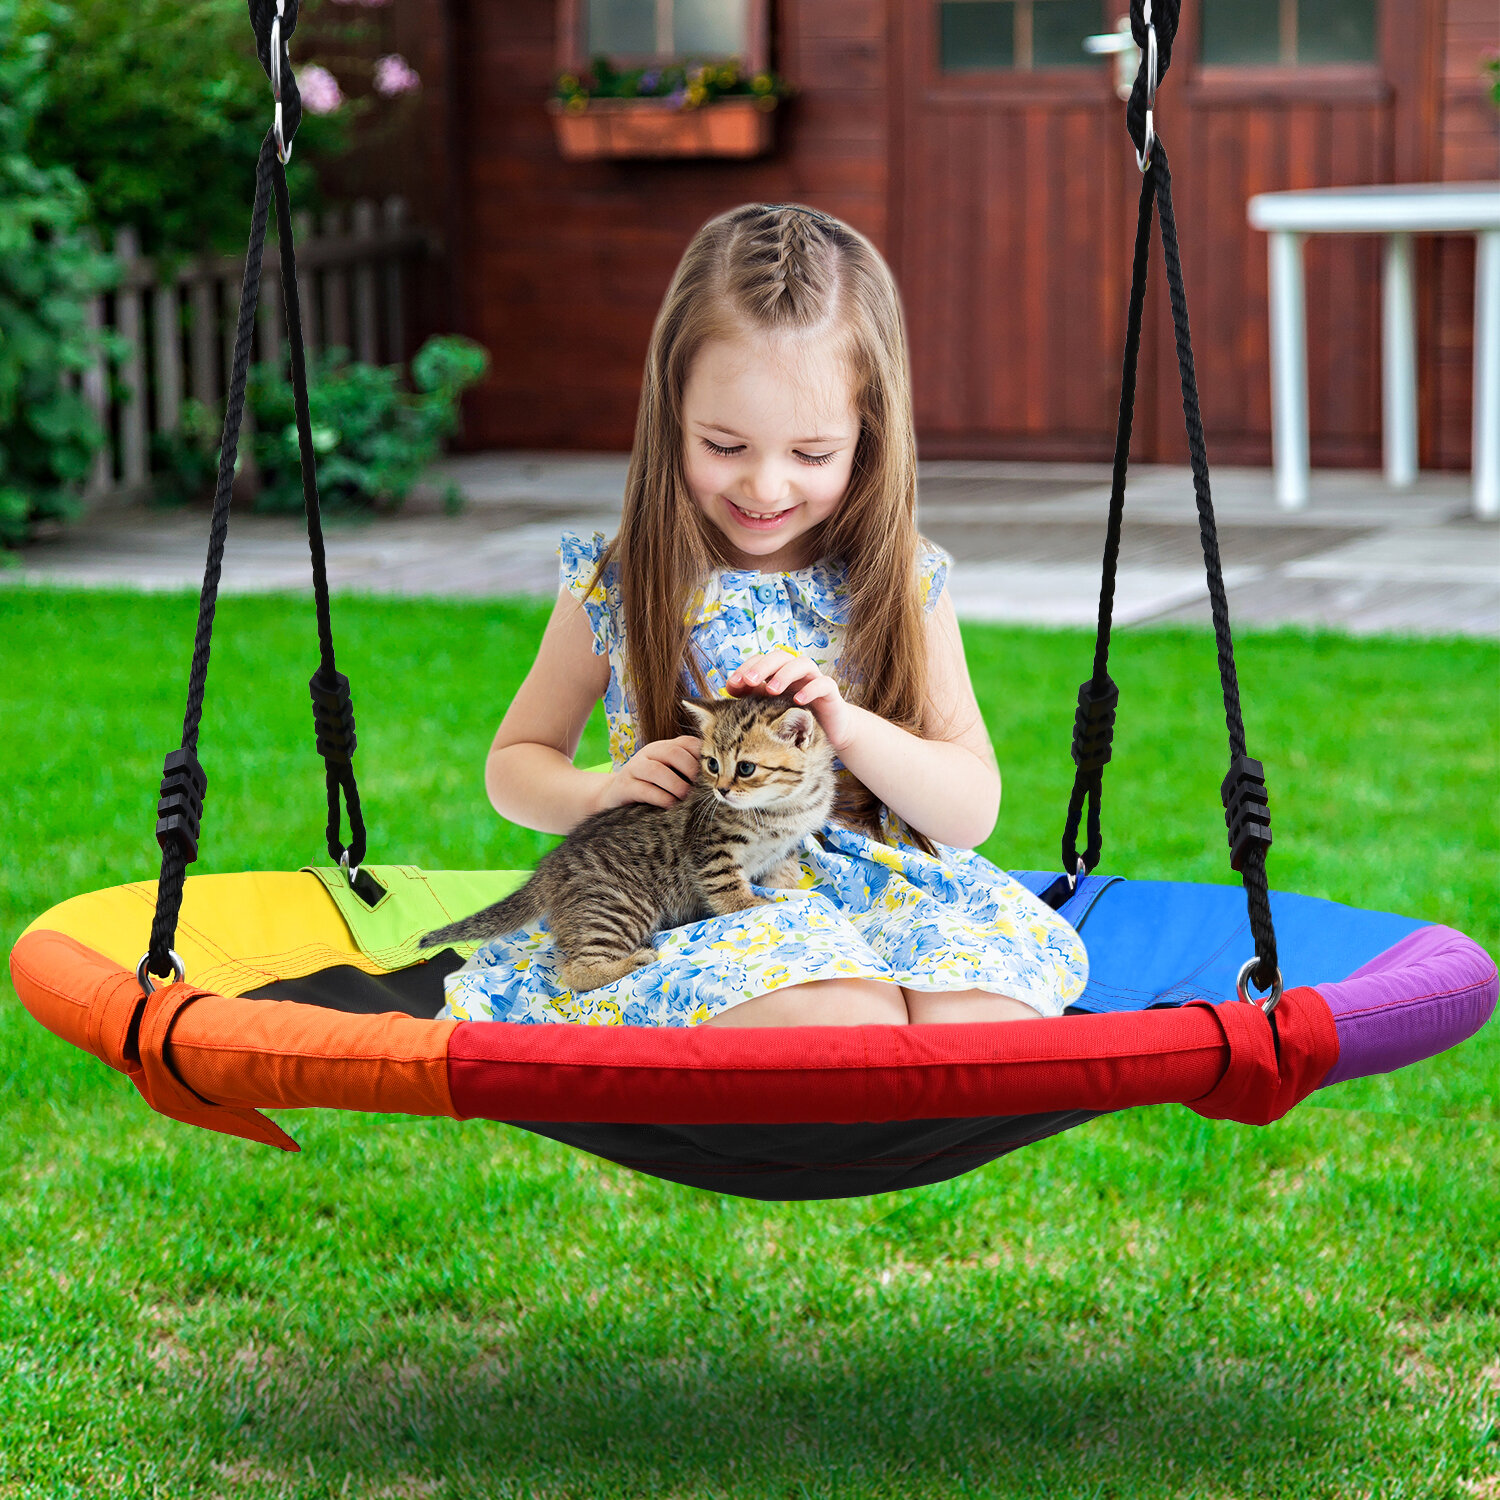 Colourful Saucer Tree Swing for Kids Indoor Outdoor,40 Round Swing with Hanging Kit,700 lbs Weight Capacity,Adjustable Multi-Strand Ropes,Great for Tree,Swing Set,Backyard,Playground,Easy to Install